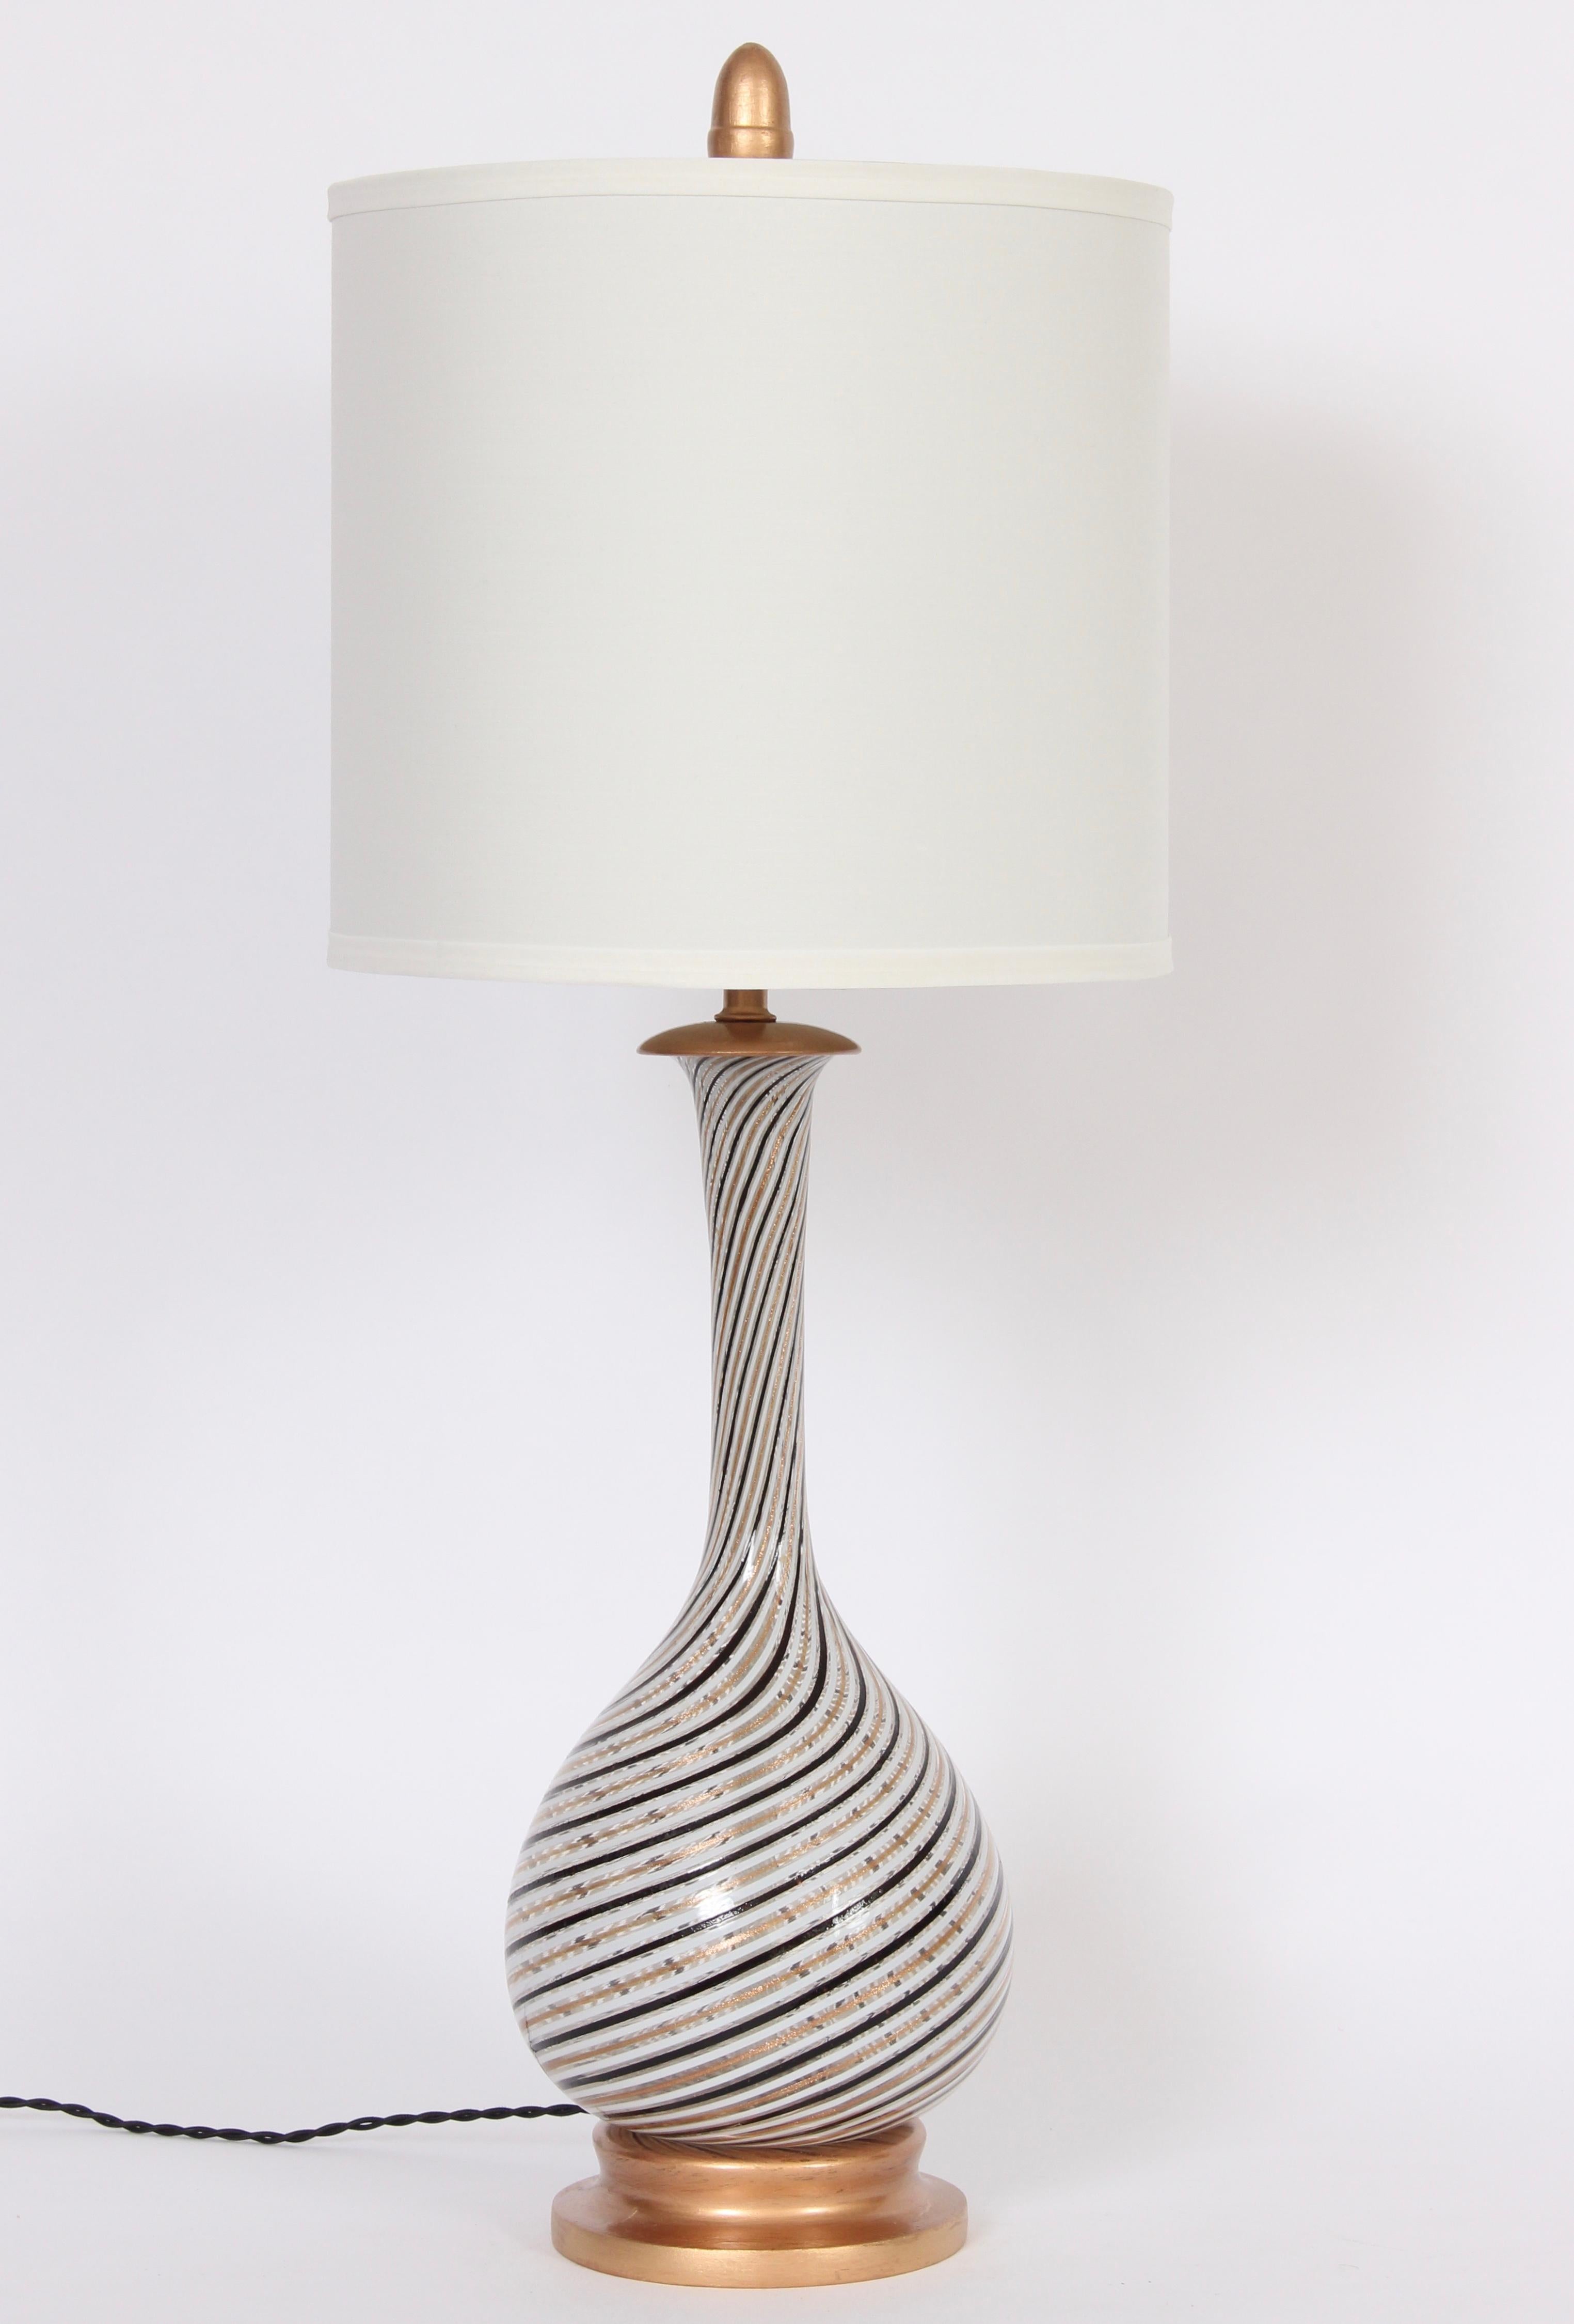 Substantial Dino Martens Aureliano Toso black, white and copper swirl table lamp. Featuring a slender handcrafted gourd form with white glass with black and copper diagonal striped decoration. Accentuated with Copper cap, base and finial. Shade